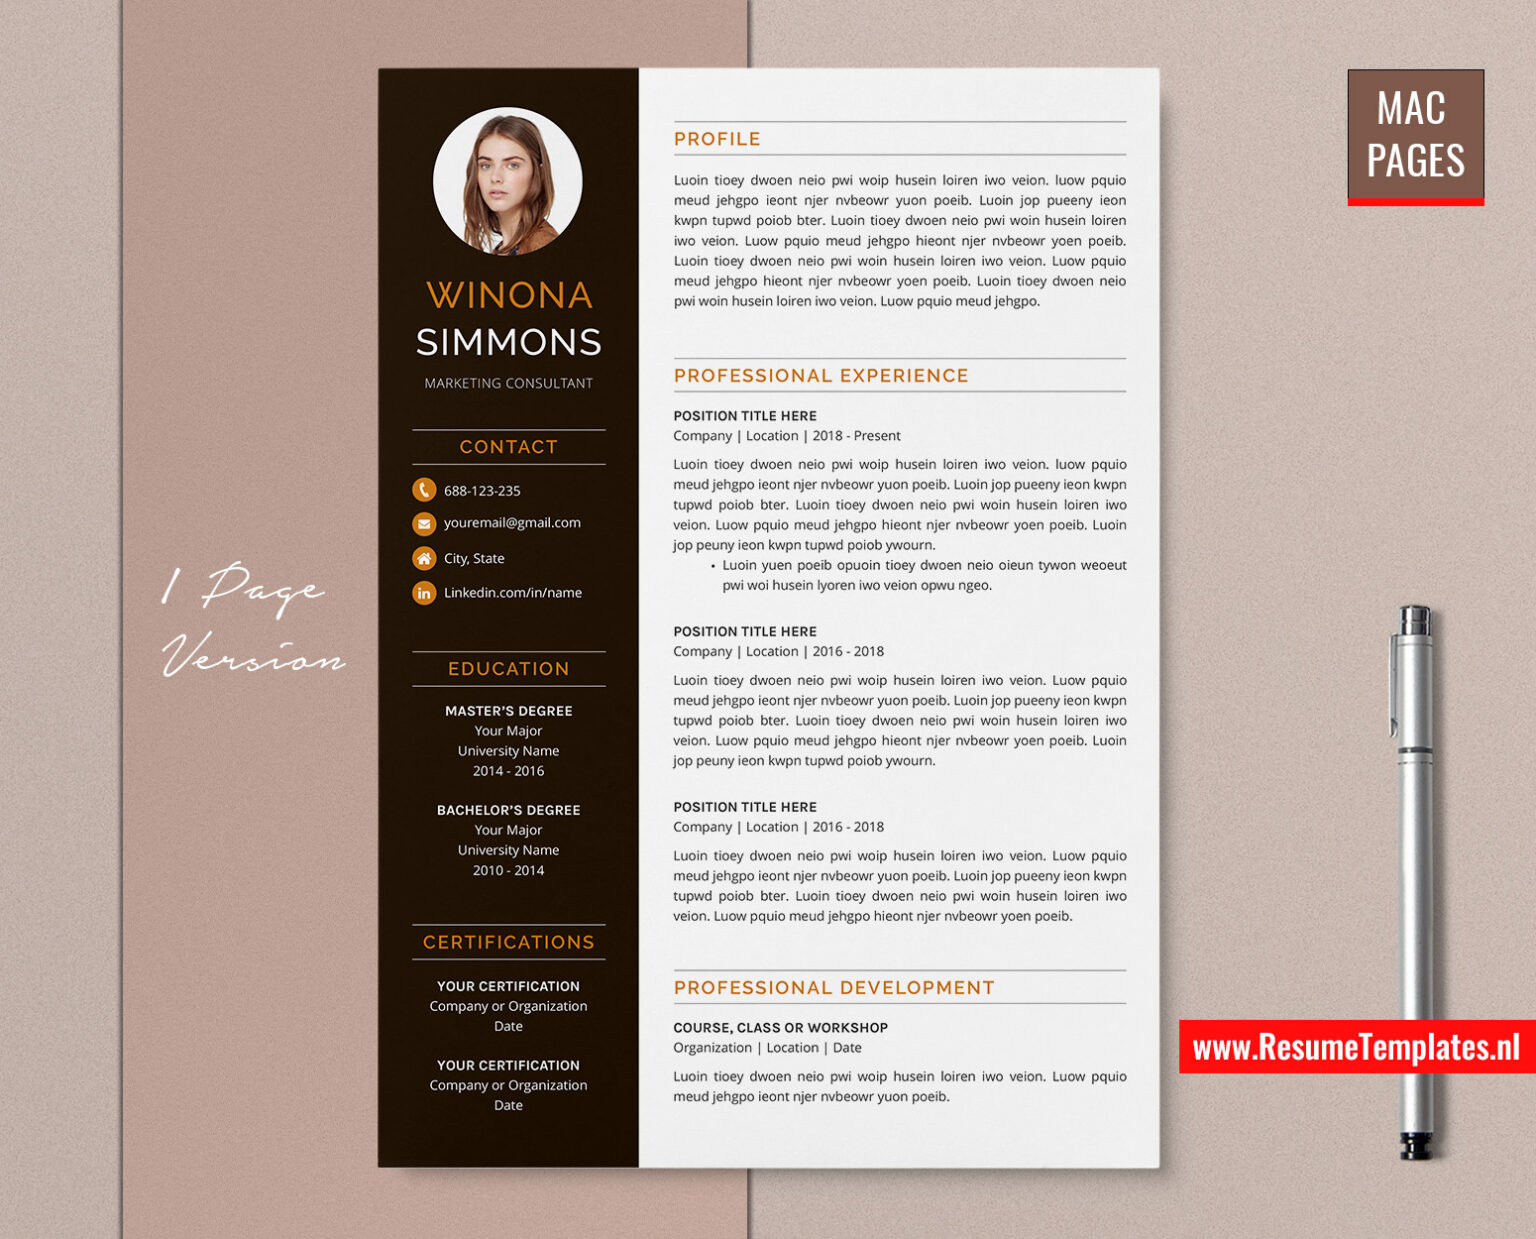 apple pages templates resume